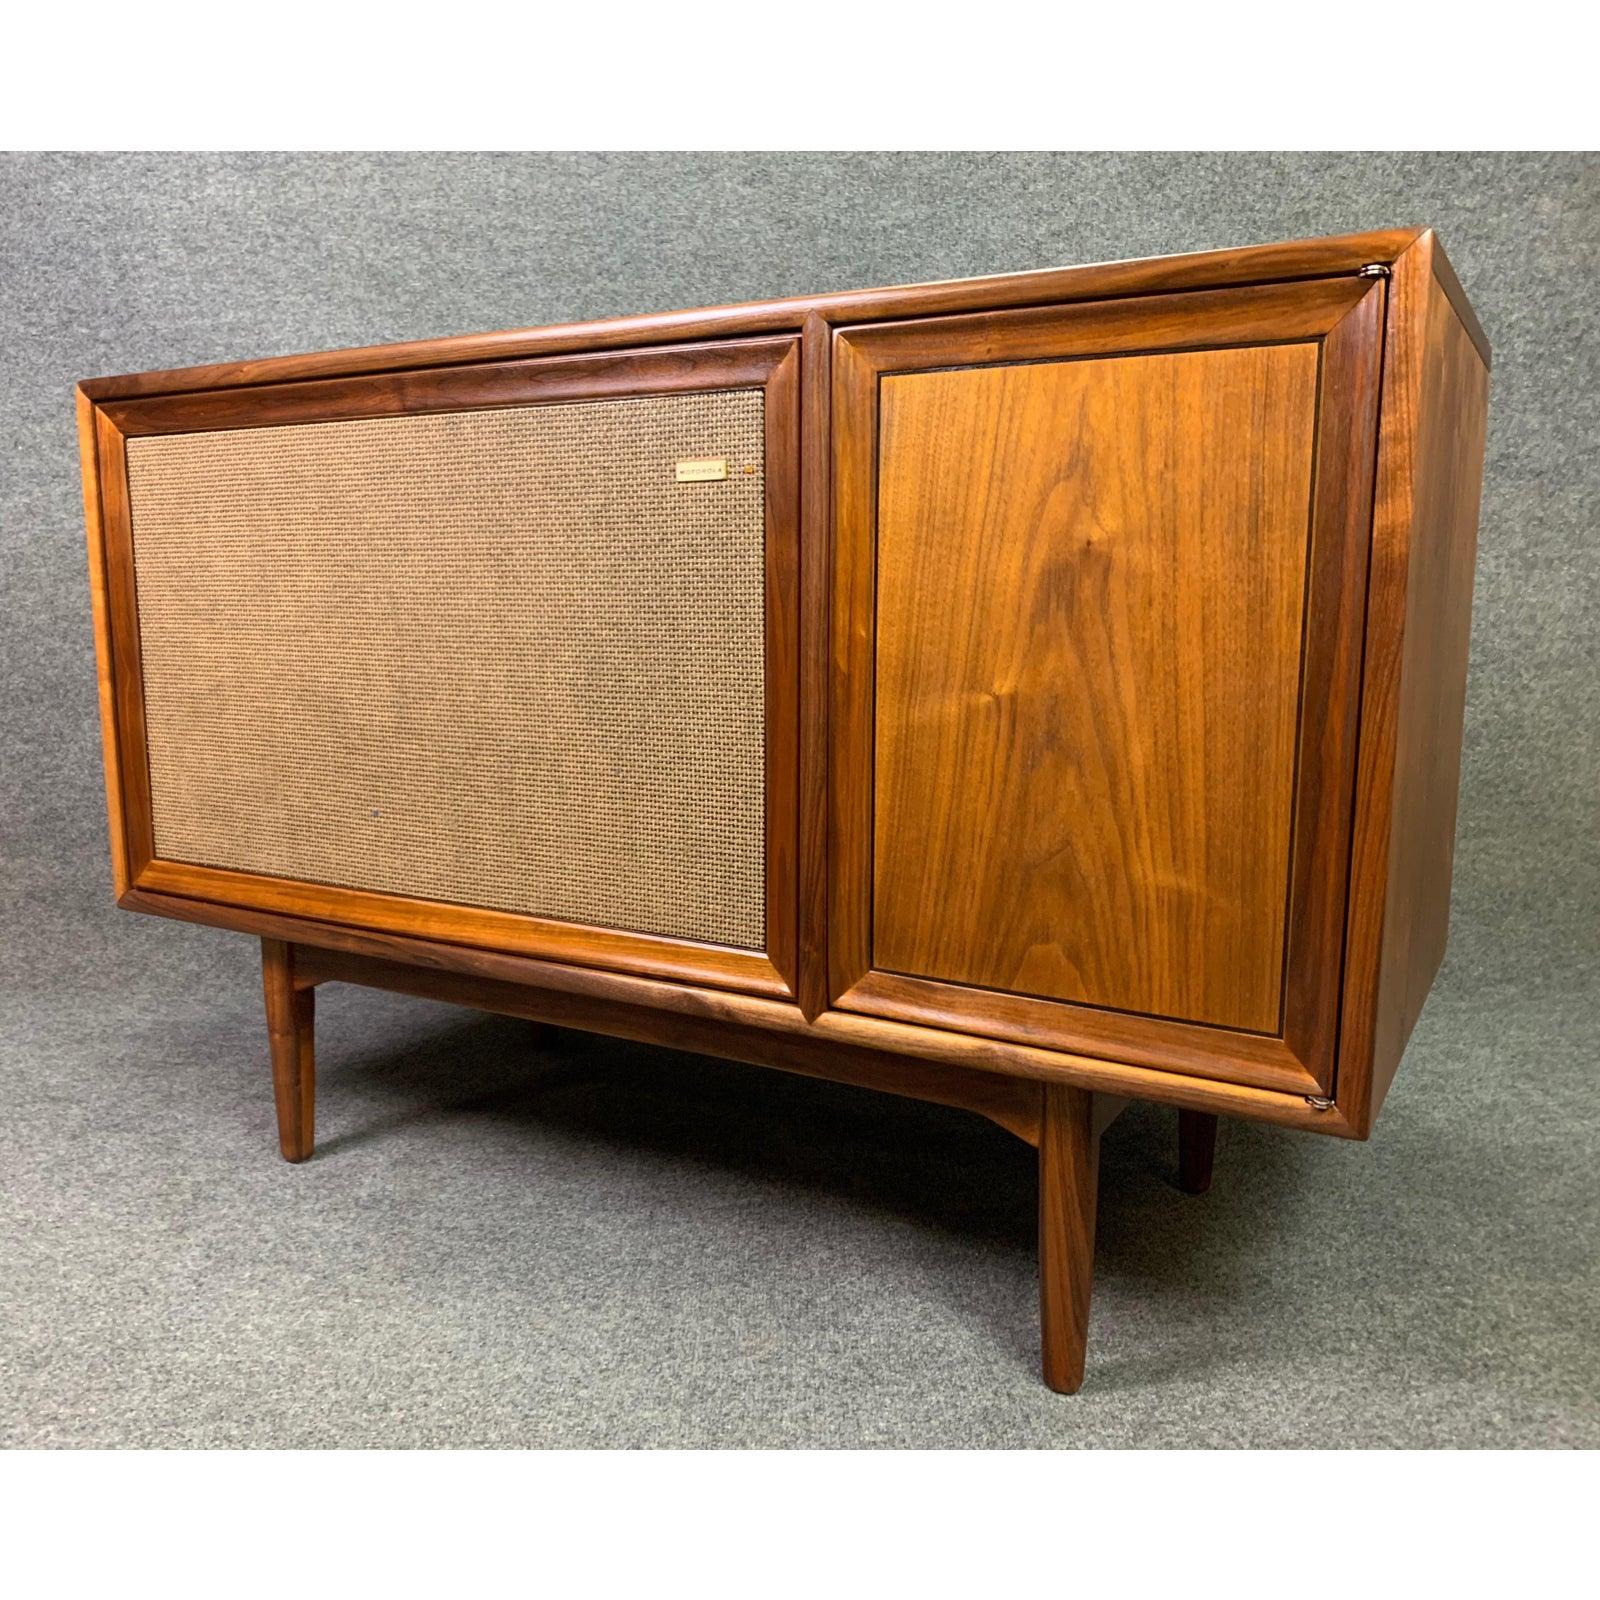 Here is a rare and beautiful midcentury stereo console-cabinet designed by Kipp Stewart and Stewart McDougall from the sought after 